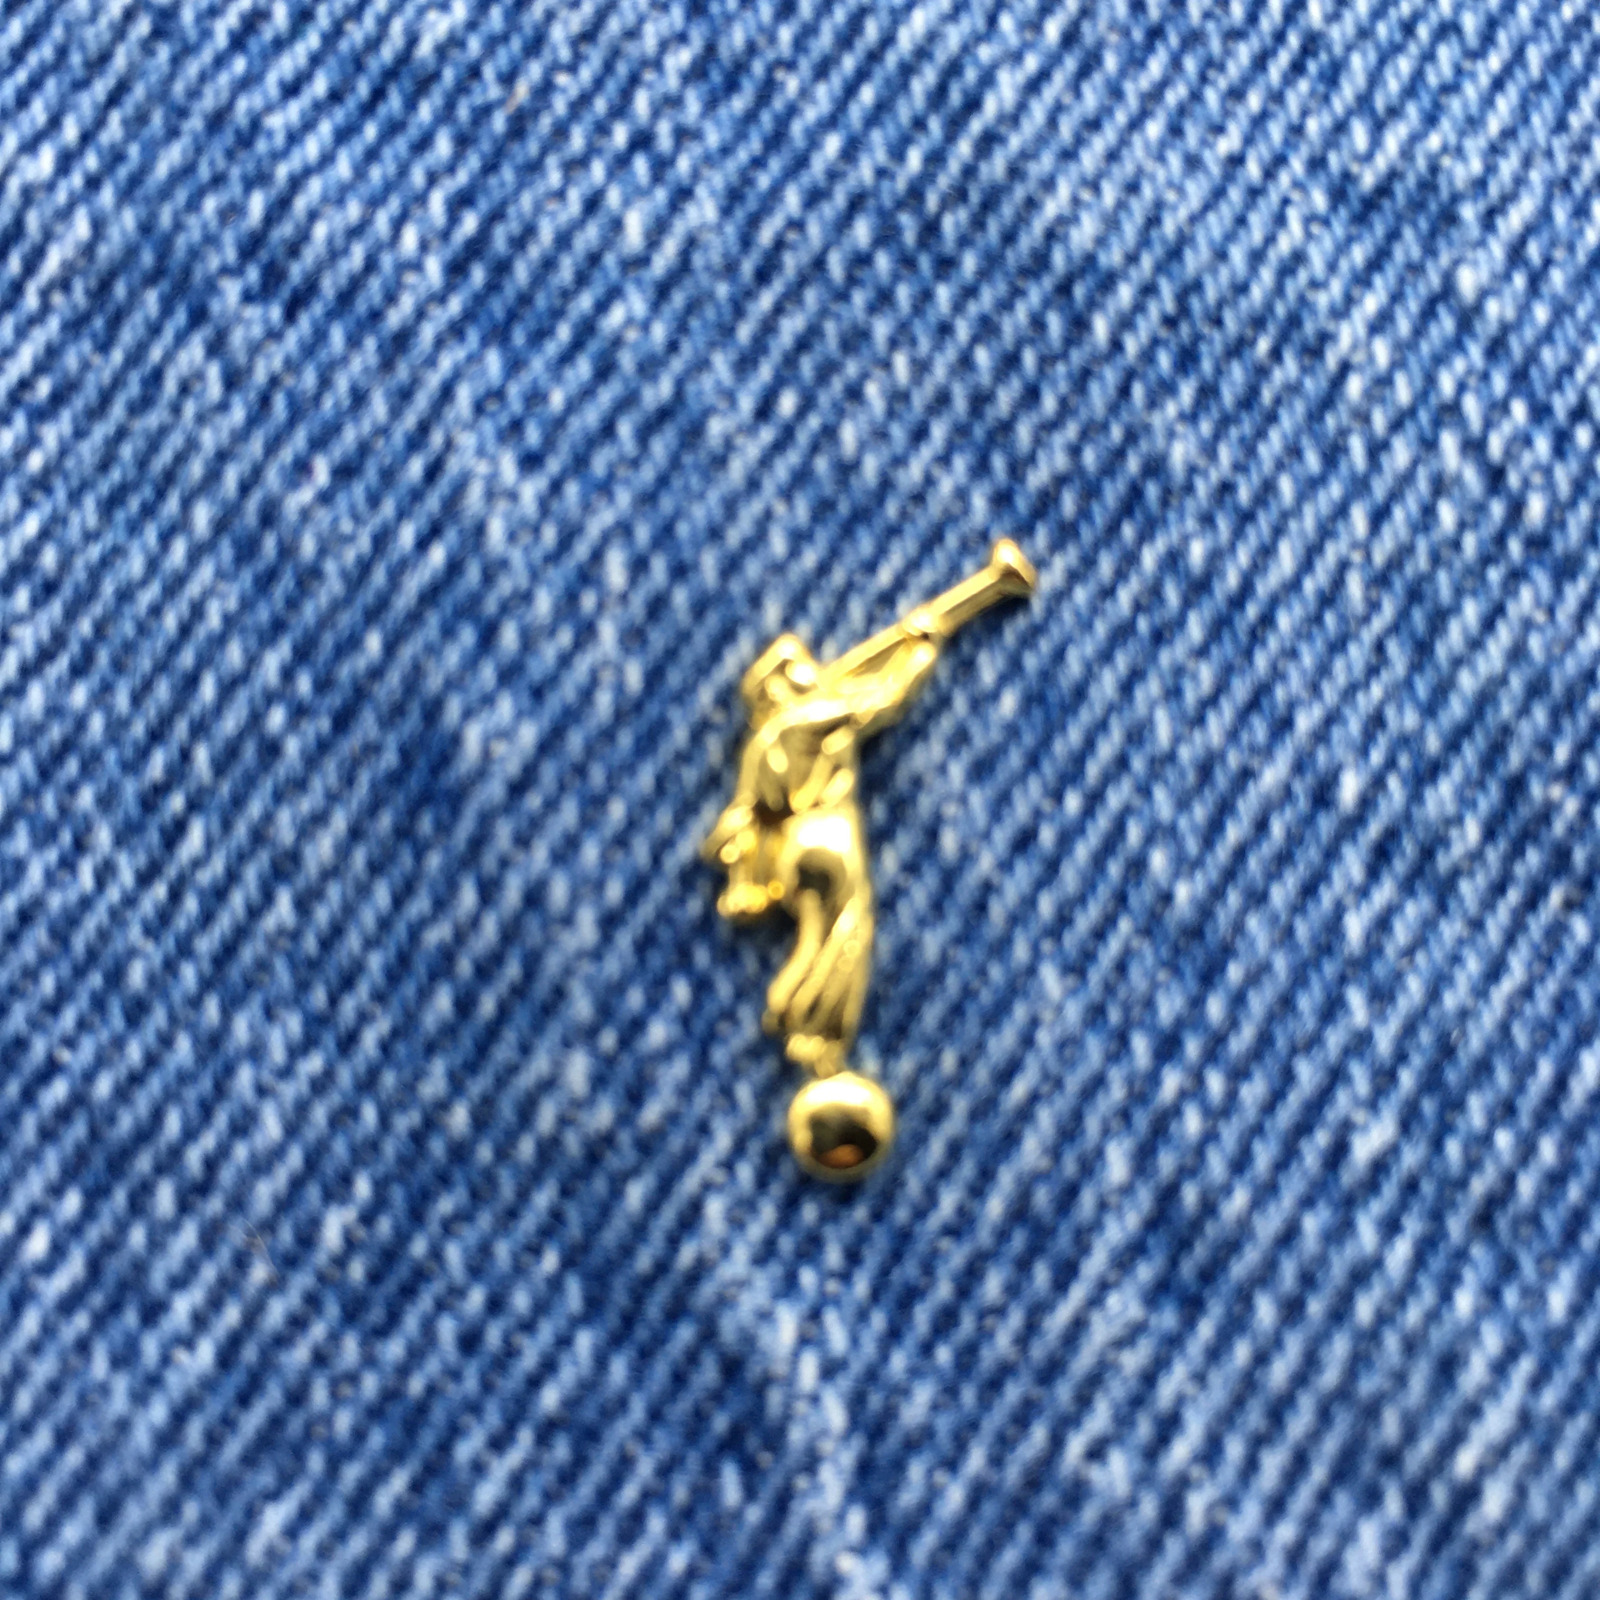 Gold Color LDS Angel Moroni Lapel Pin FREE USA SHIPPING SHIPS FREE FROM THE USA